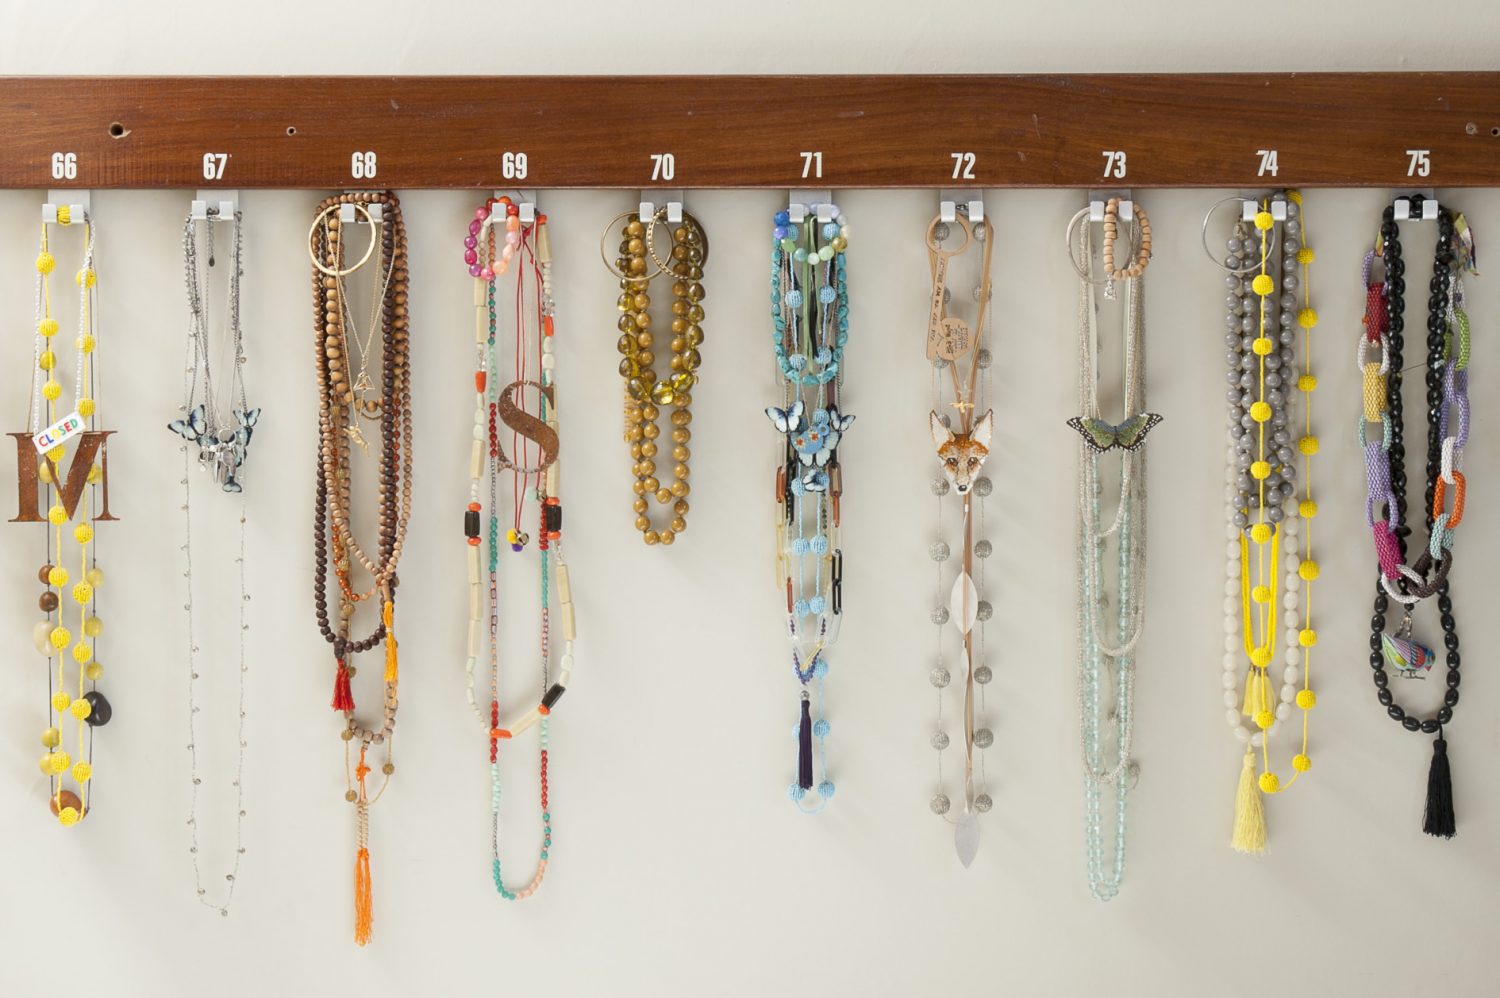 Sarah’s collection of necklaces hangs from a row of salvaged school coat hooks